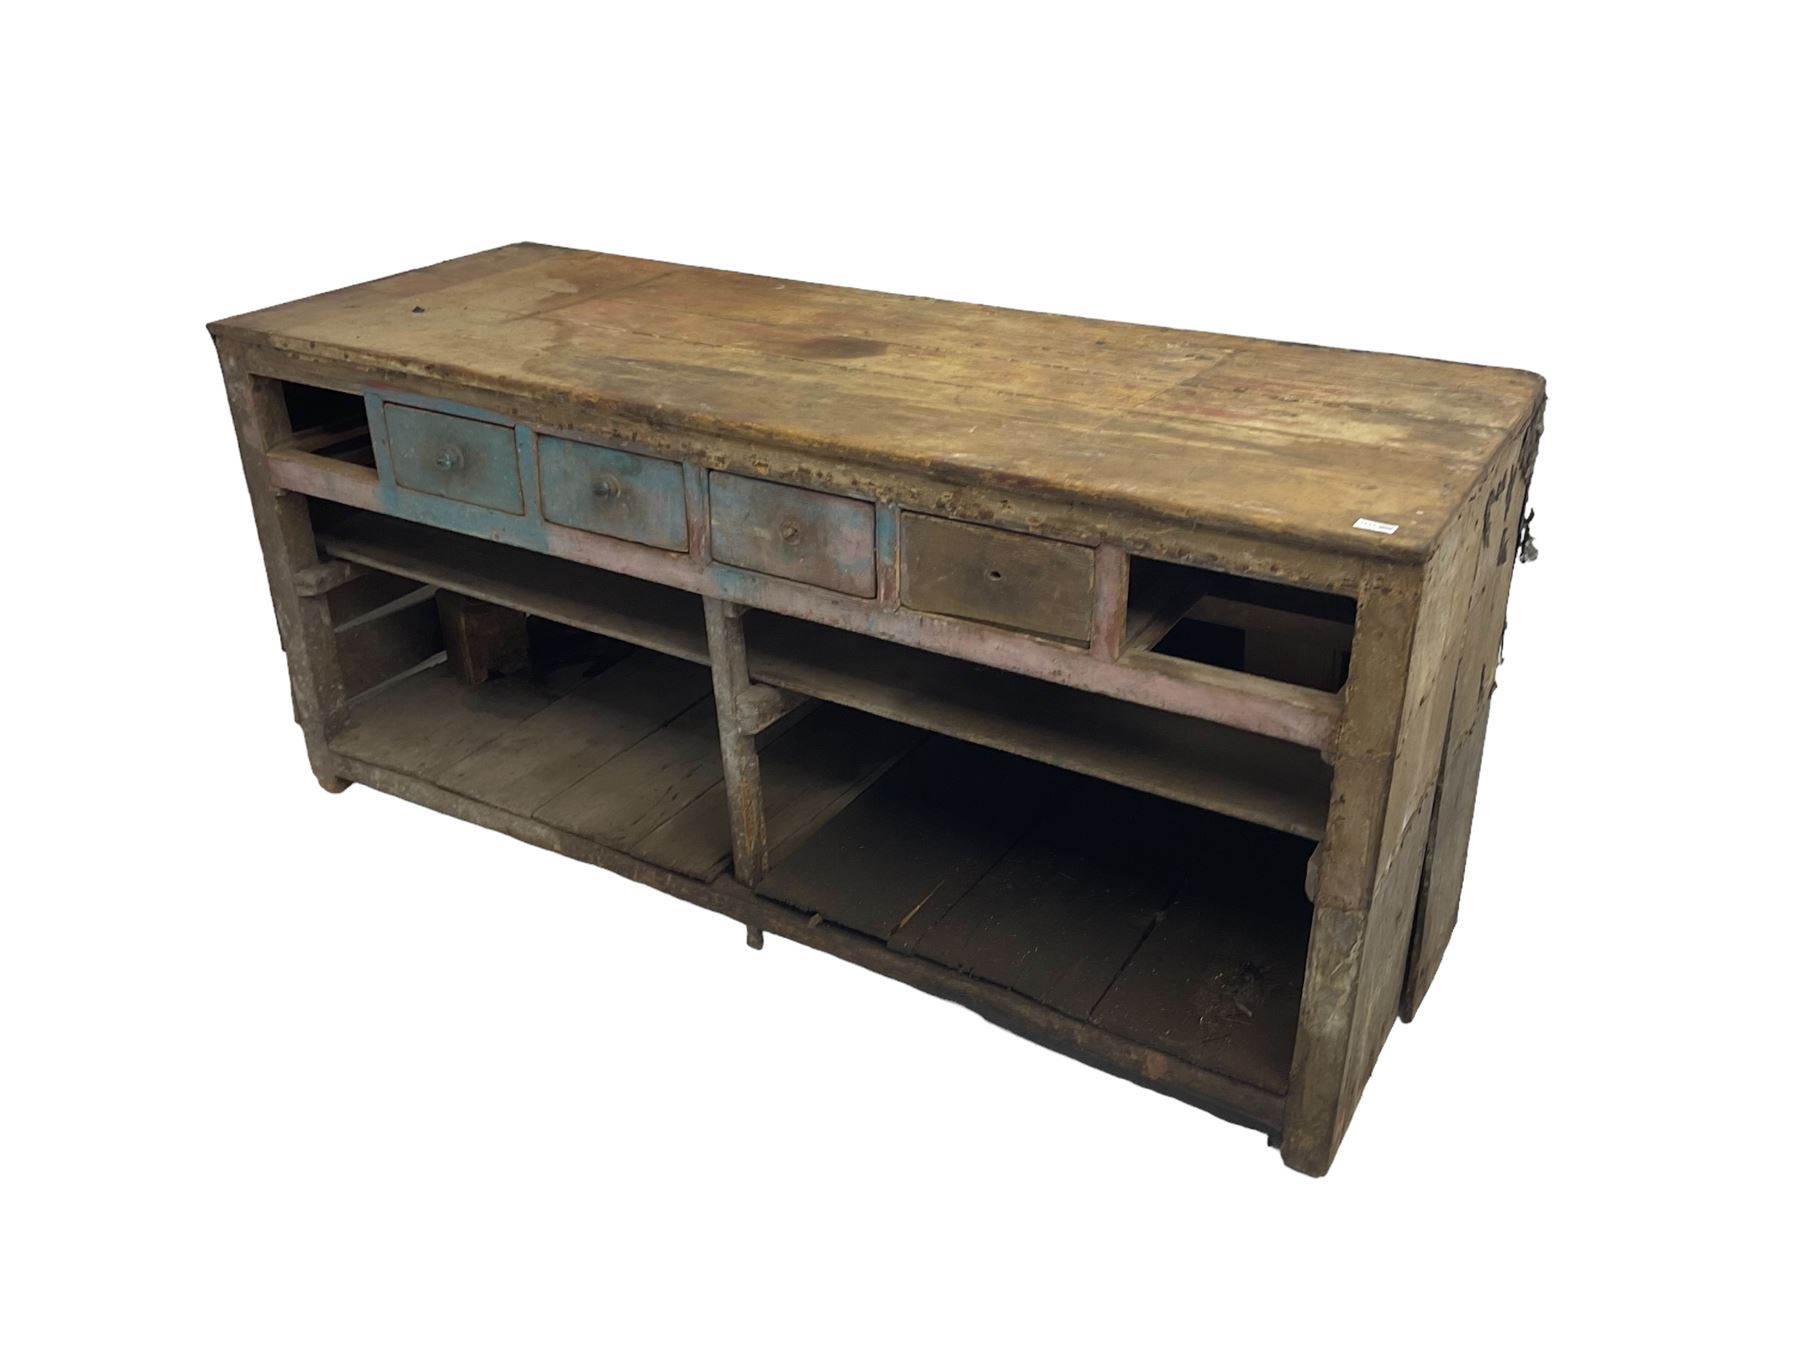 Early 20th century rustic pine workman's bench - Image 2 of 5